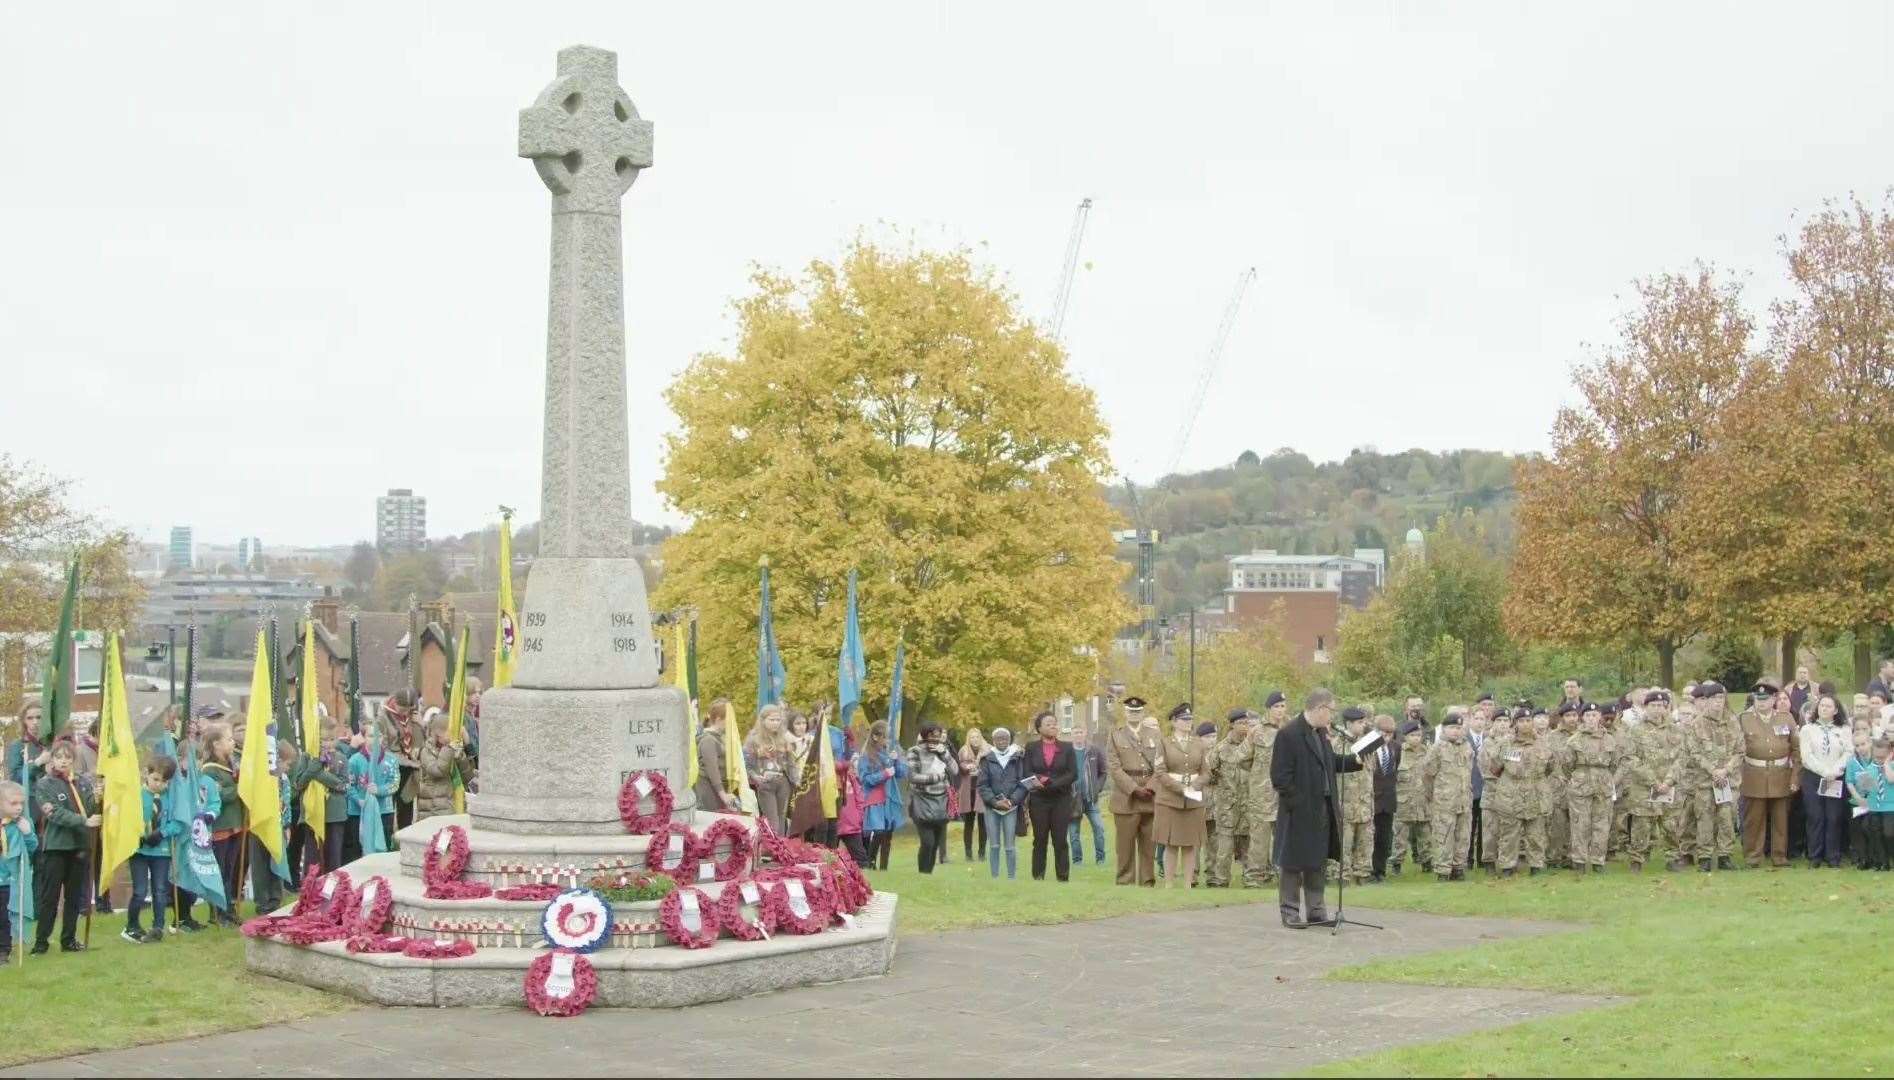 People gathered to pay respects on Remembrance Sunday at Victoria Gardens. Images from Kent Media Group